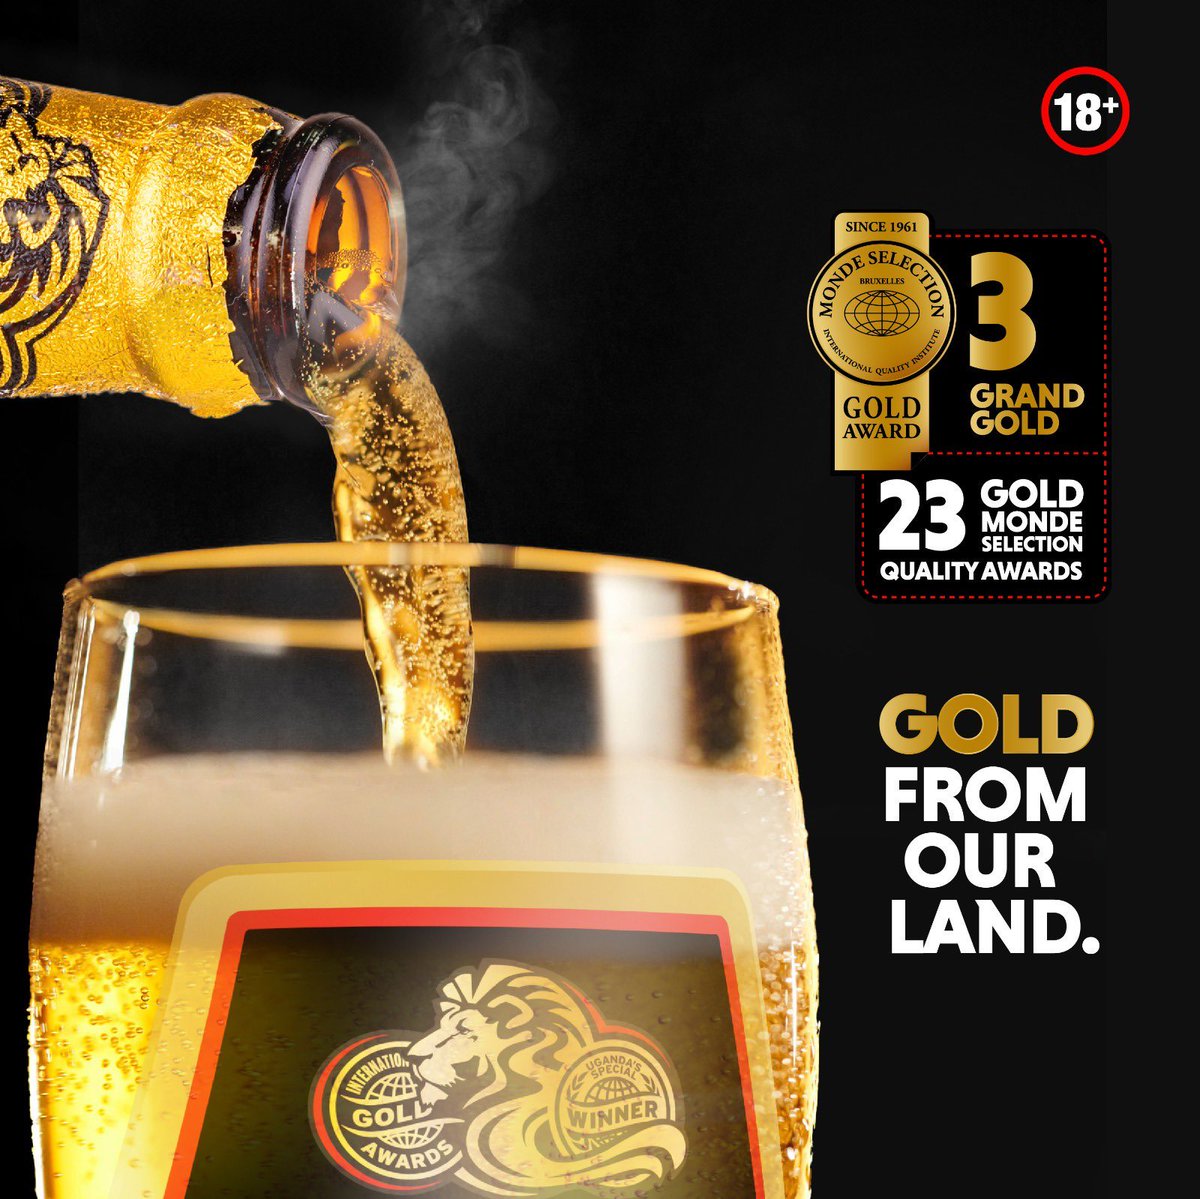 What’s an evening without a Nile special?

#UnmatchedInGold